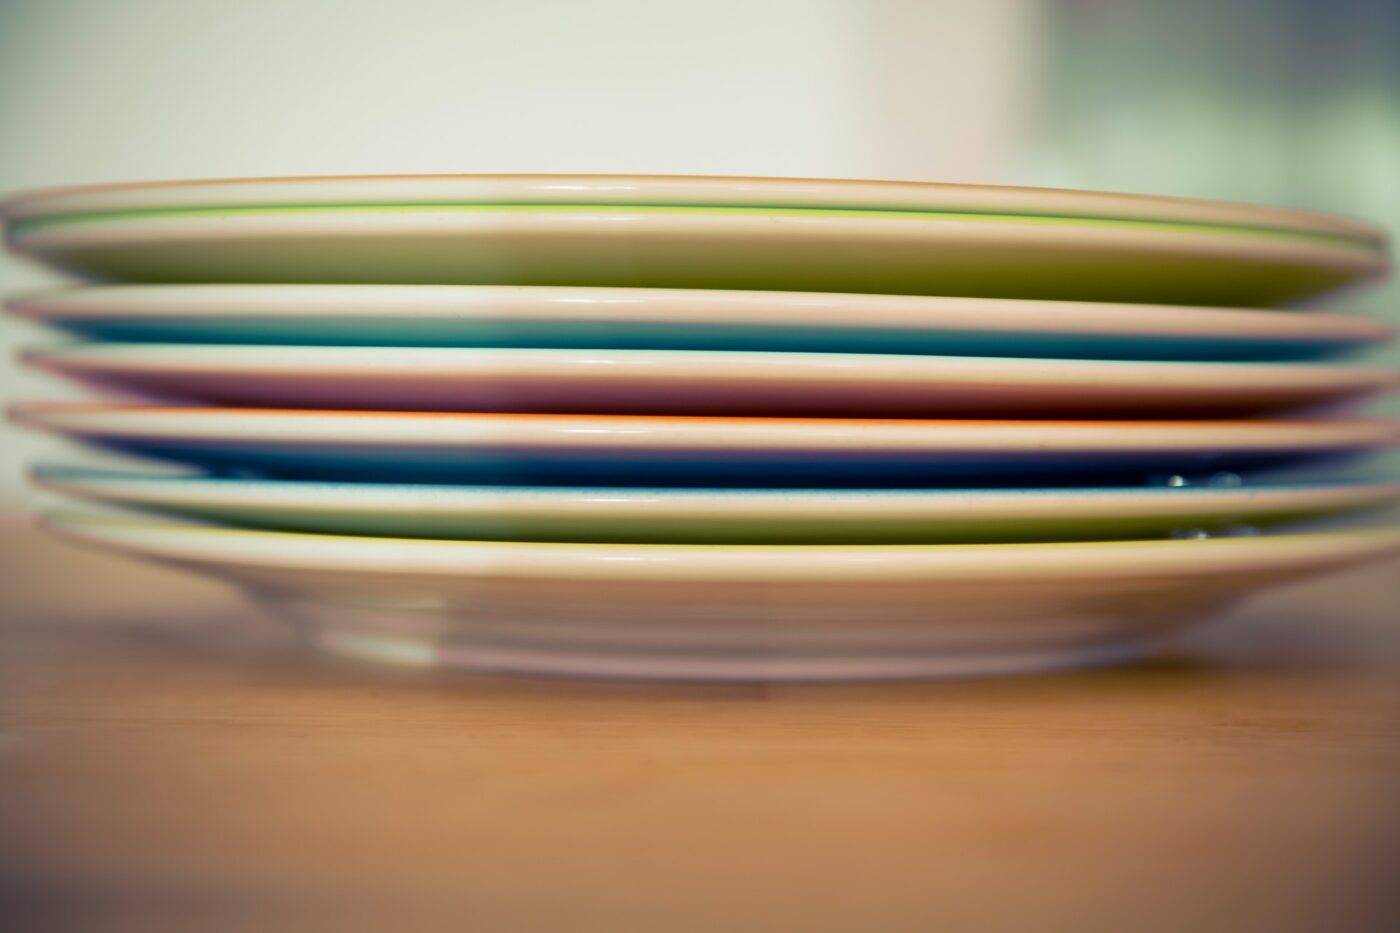 Different shaped dishes